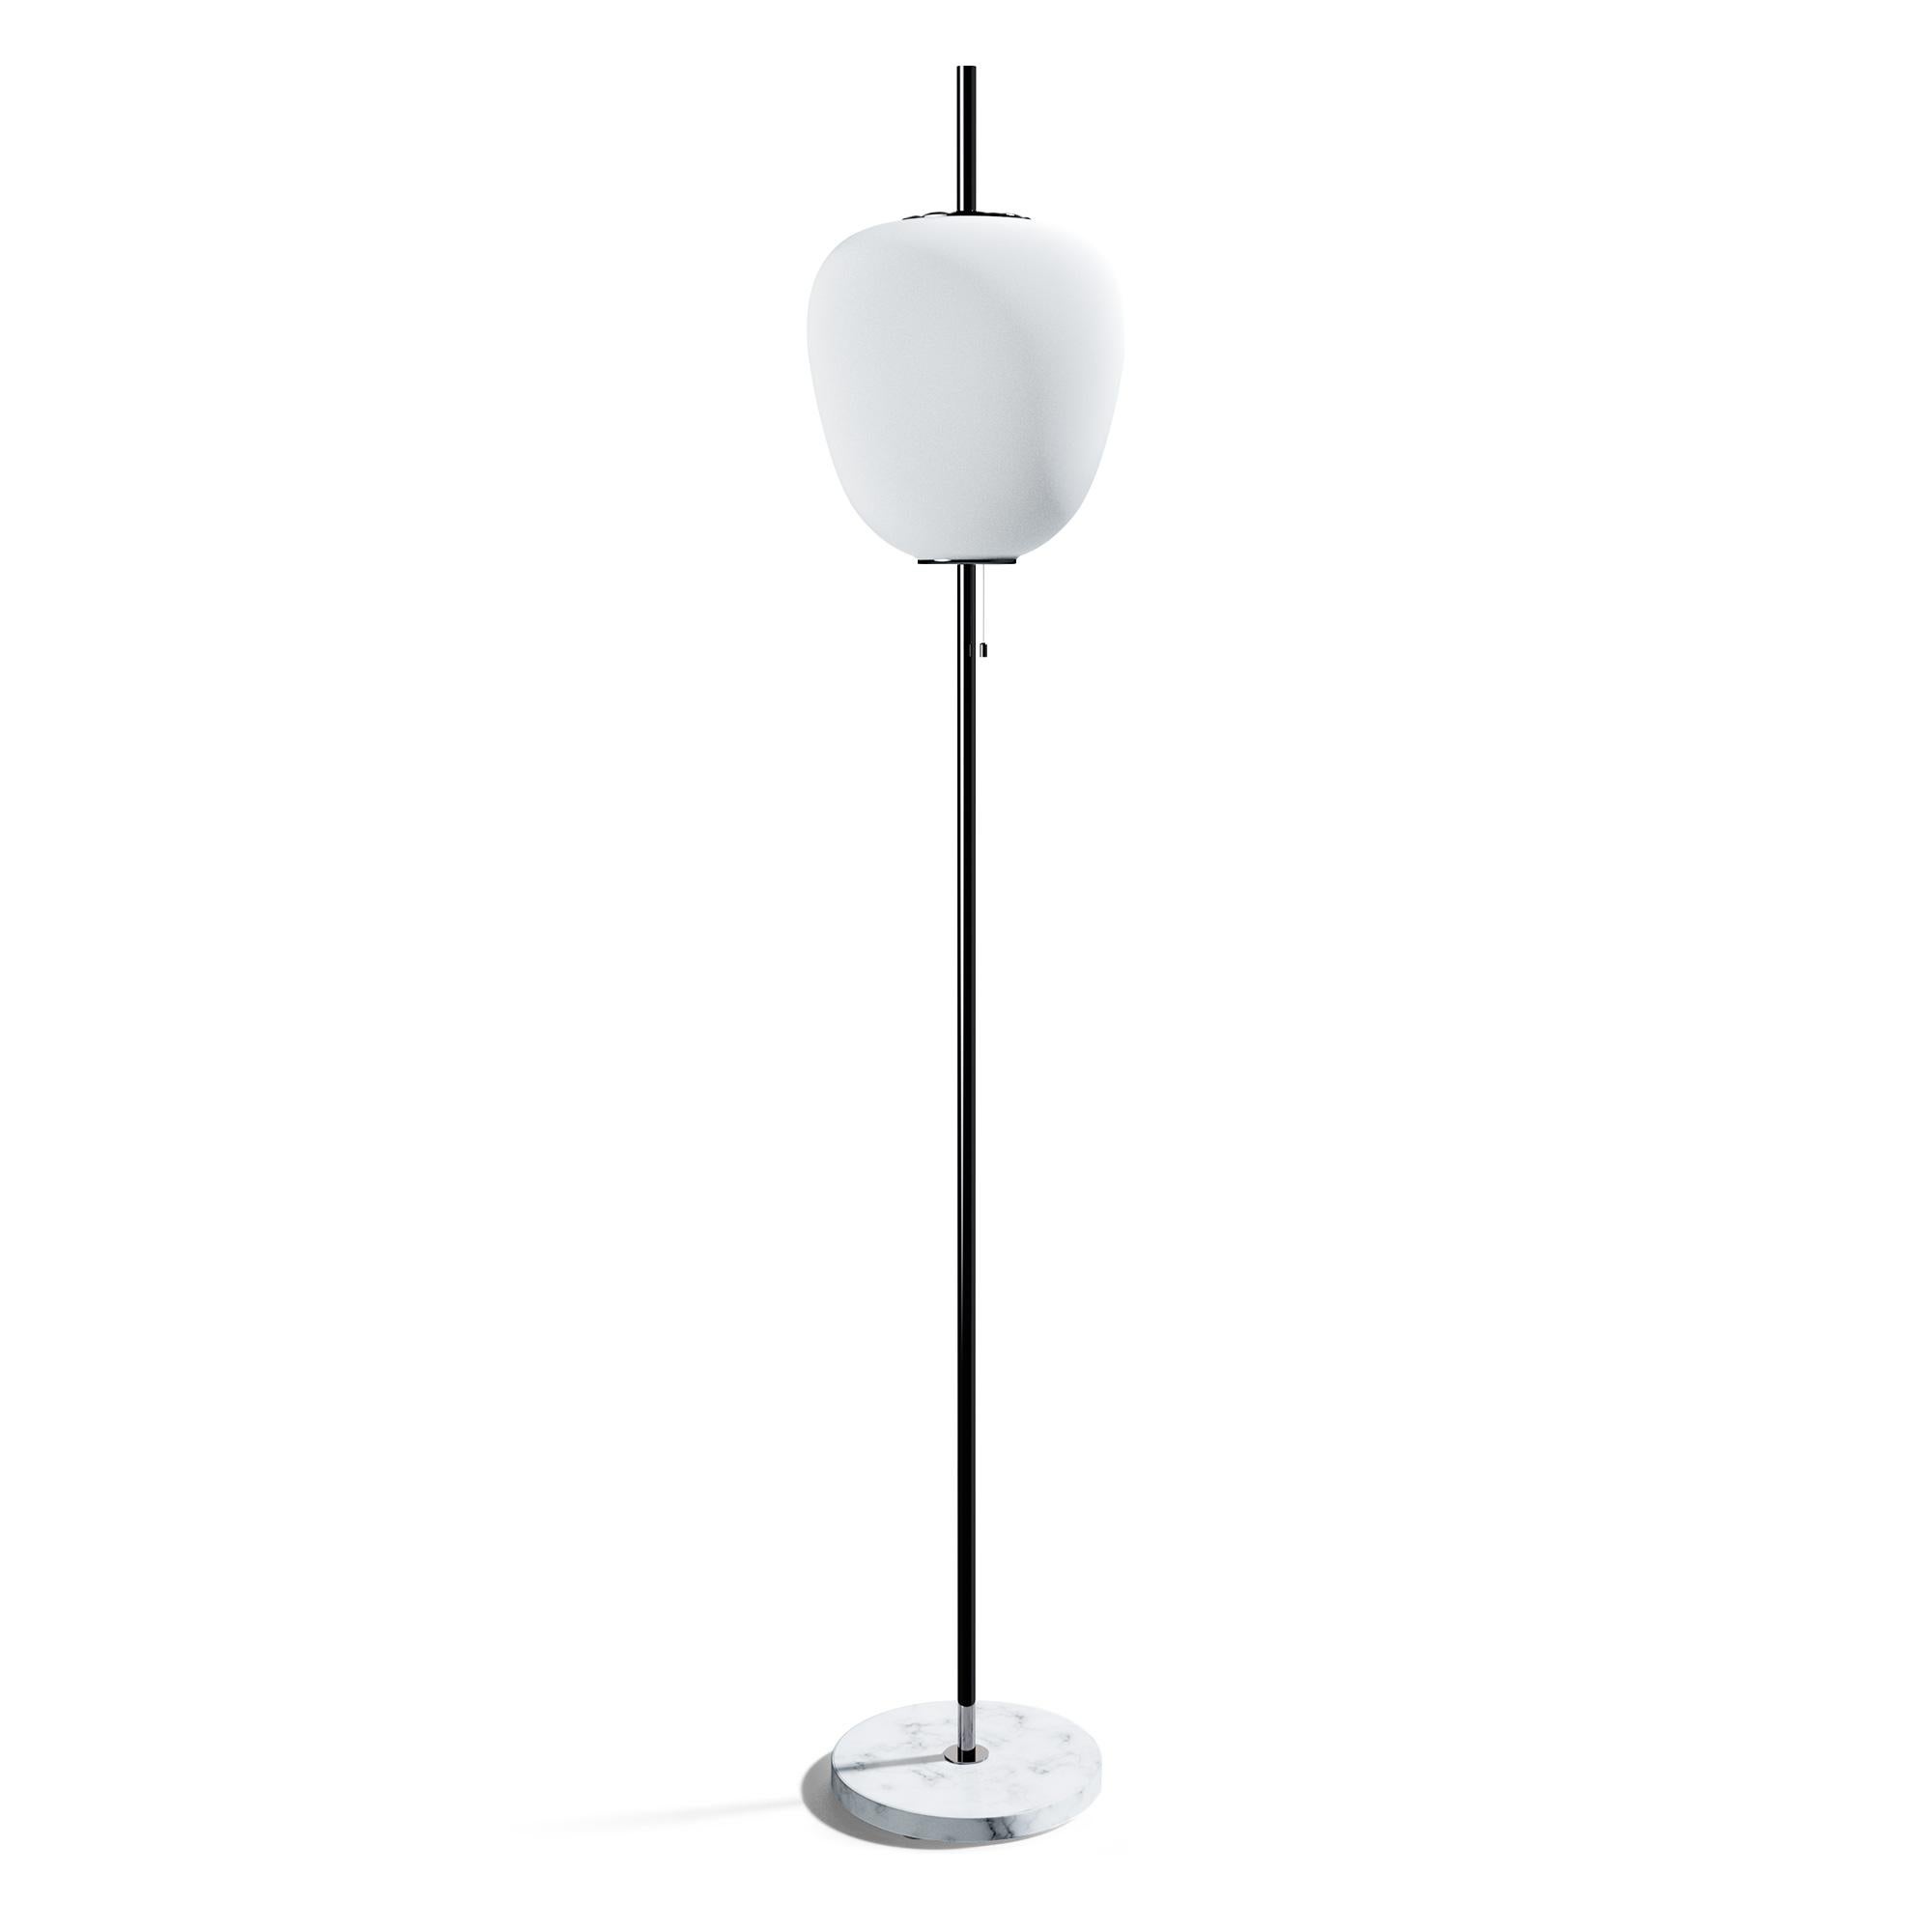 Large Joseph-André Motte J14 floor lamp in gunmetal and gray marble for Disderot. 

Originally designed in 1957, this sculptural floor lamp is a newly produced numbered edition with authentication certificate made in France by Disderot with many